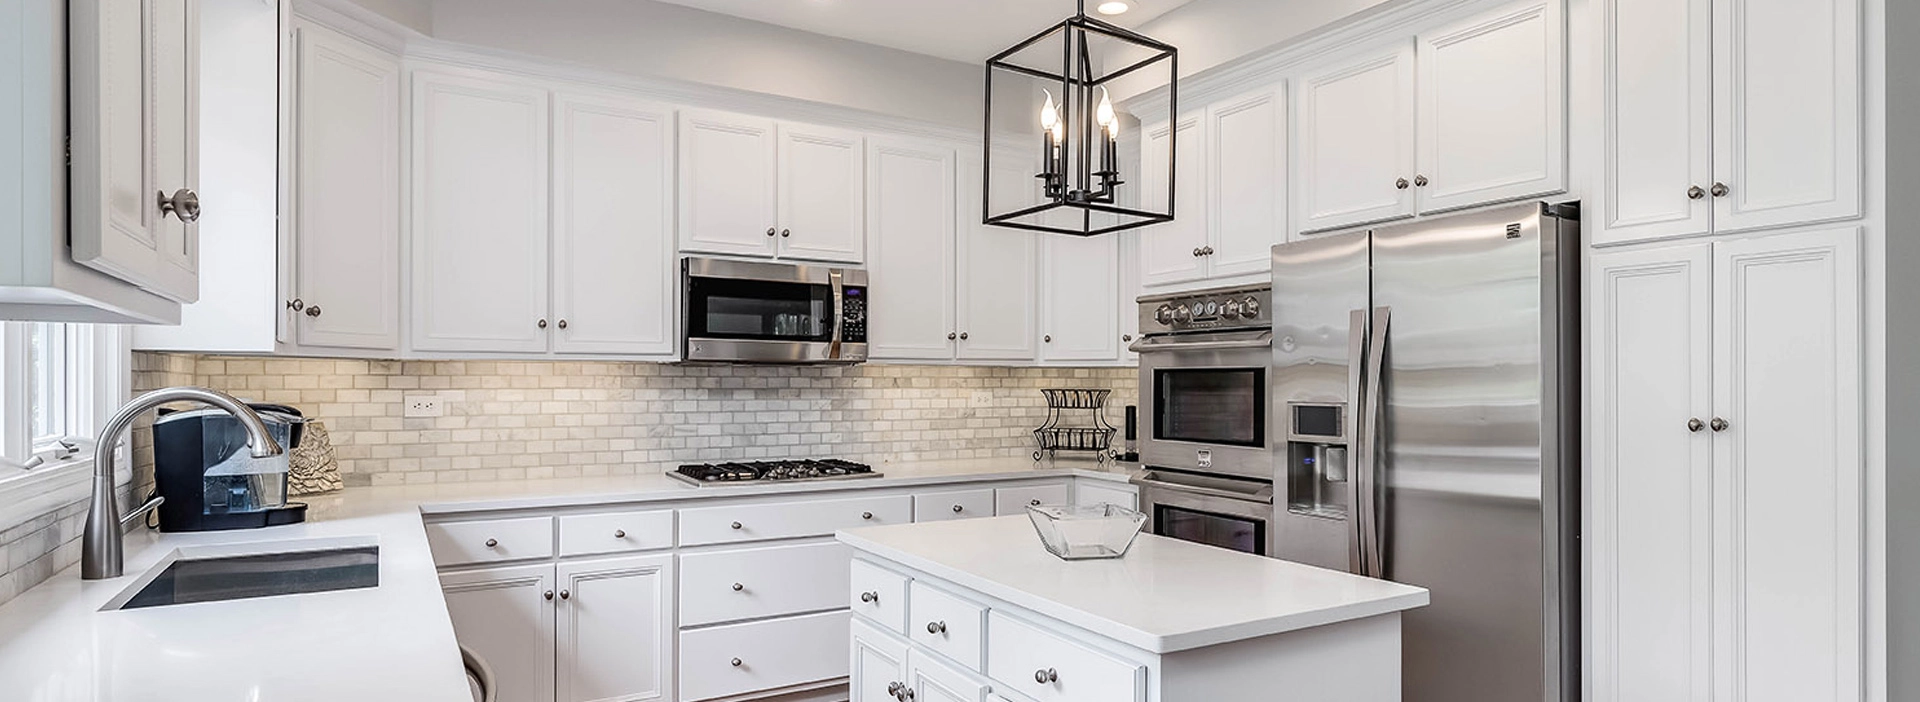 A kitchen with white cabinets and black accents.